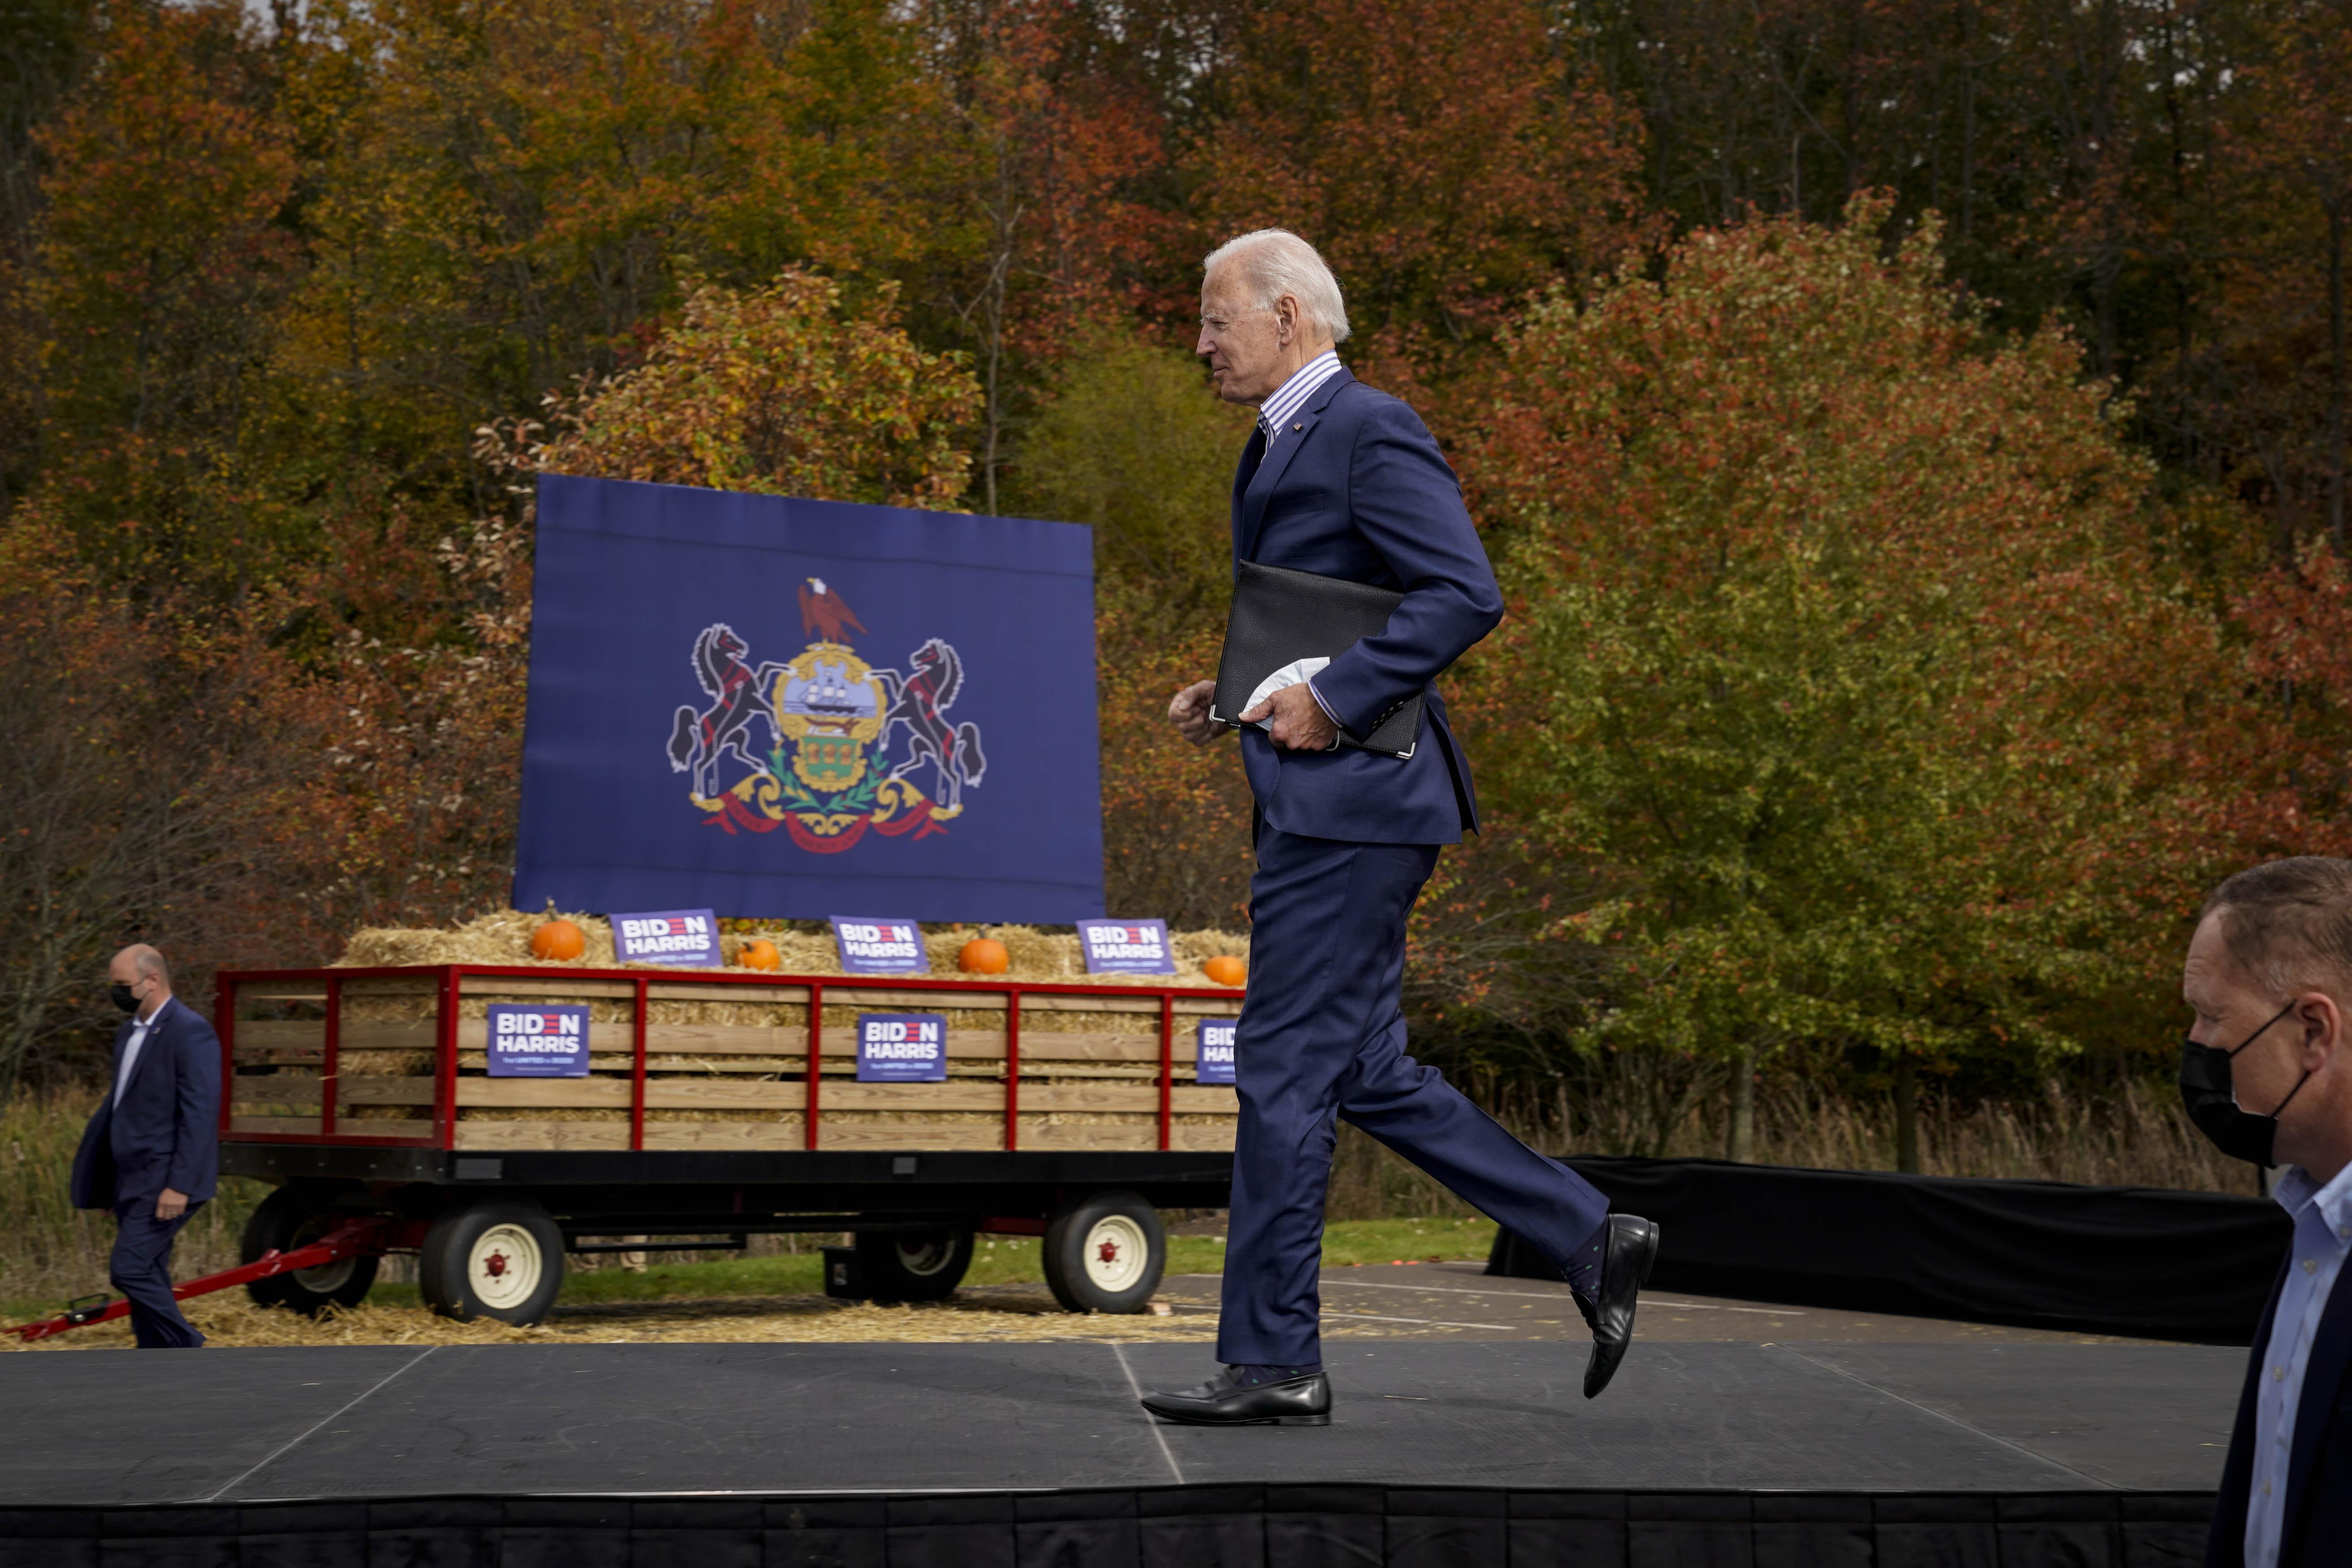 Joe Biden jogs offstage, with a cart full of hay in the background